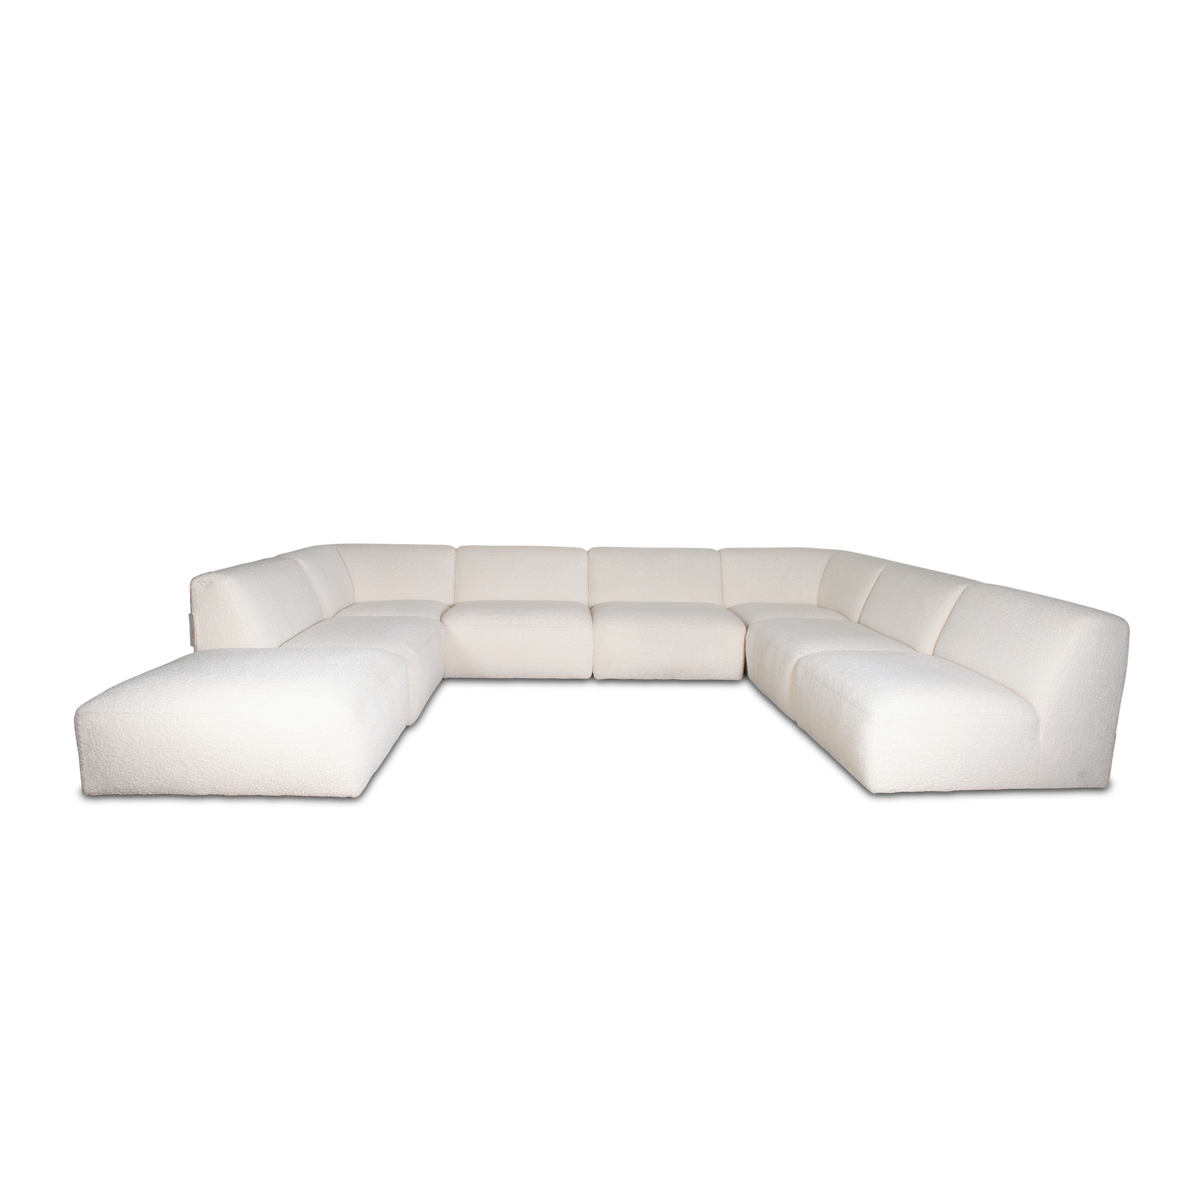 Perfect to lounge in, the Miller Modular Sectional offers a minimalist design that adds a casual glamour to any space.